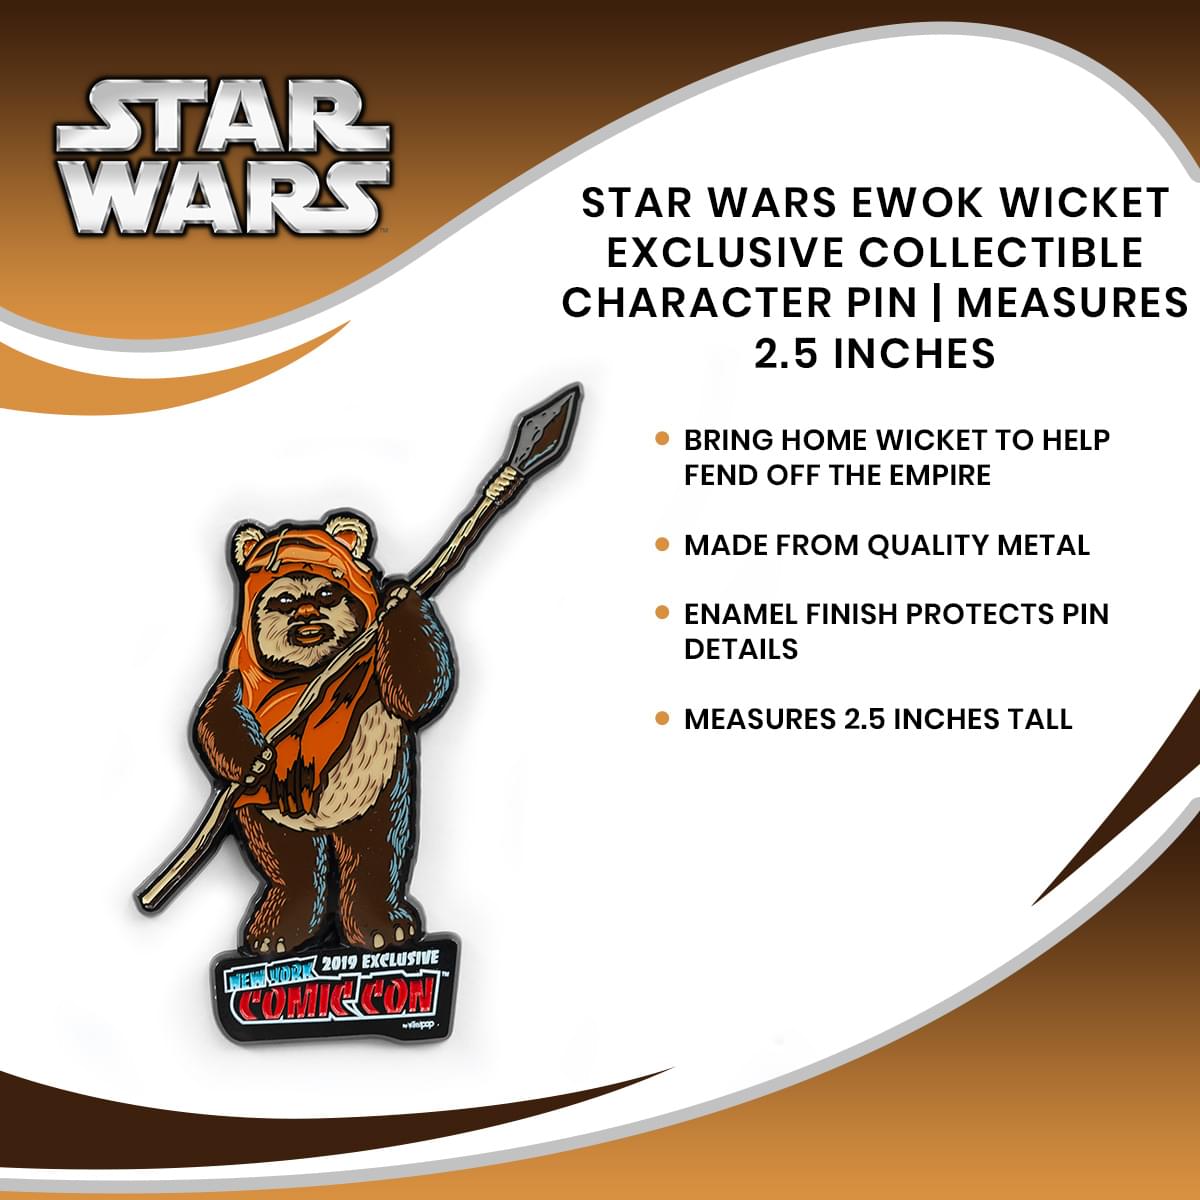 Star Wars Ewok Wicket Exclusive Collectible Character Pin | Measures 2.5 Inches